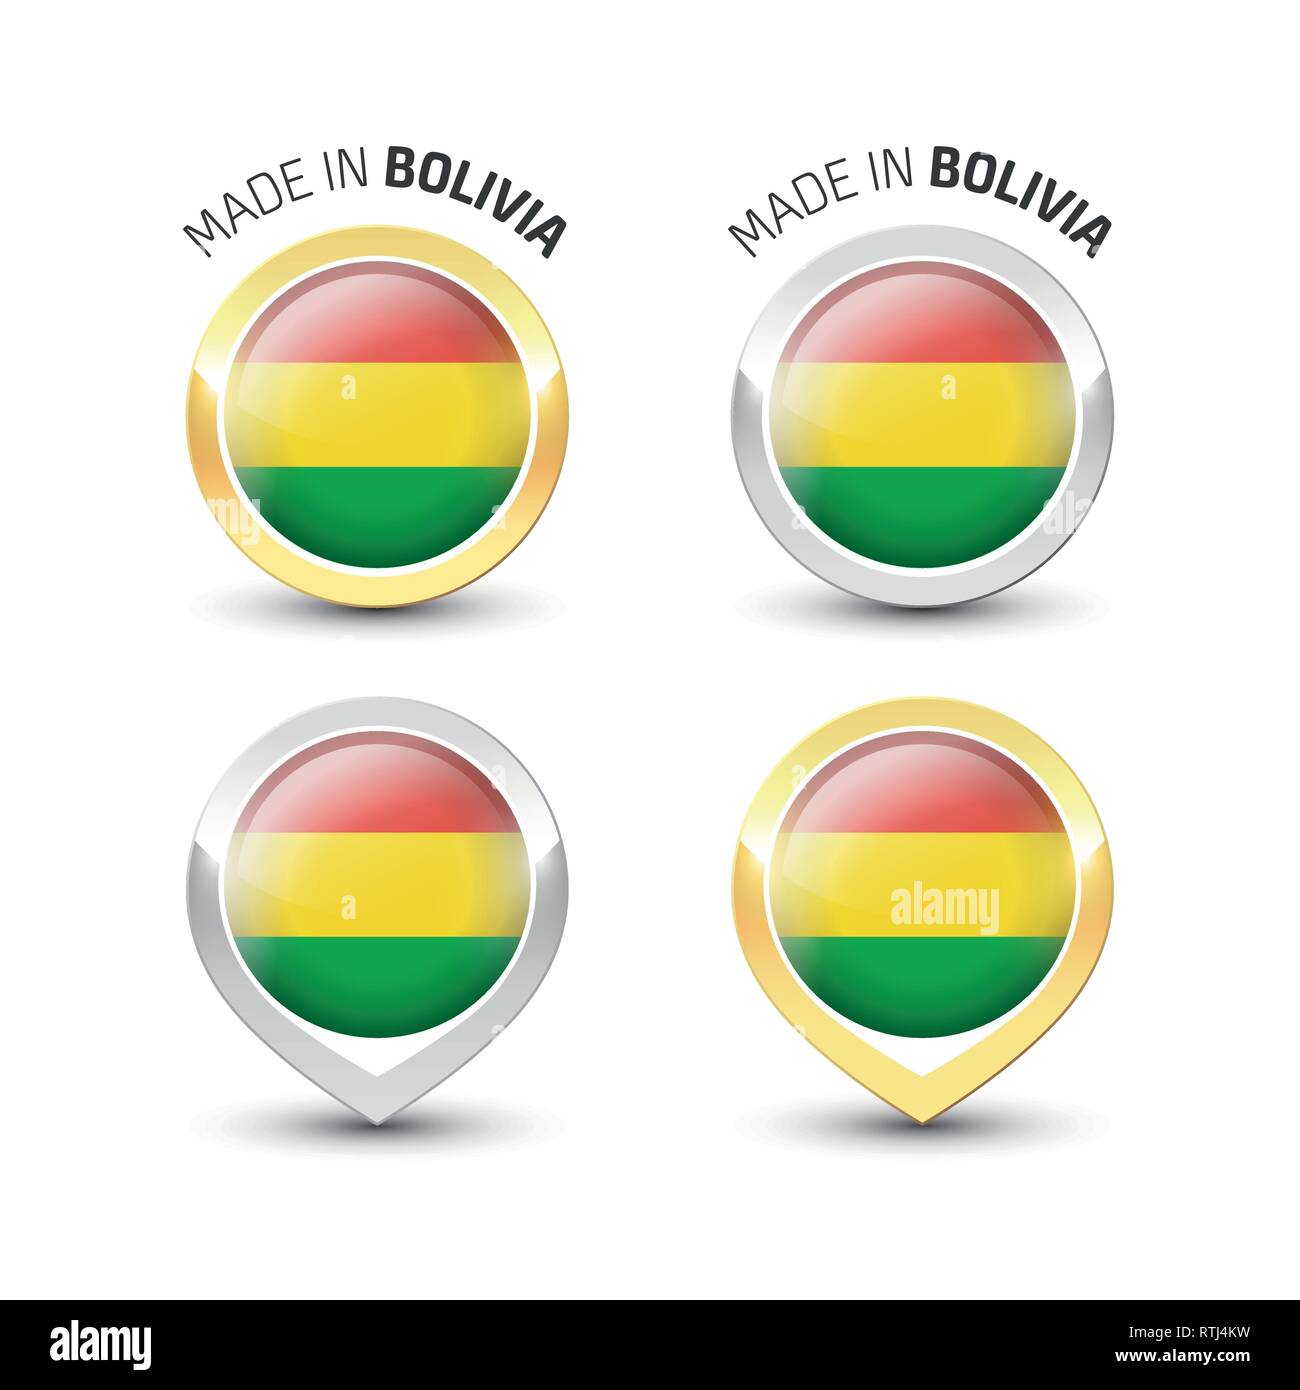 Made in Bolivia - Guarantee label with the Bolivian flag inside round gold and silver icons. Stock Vector